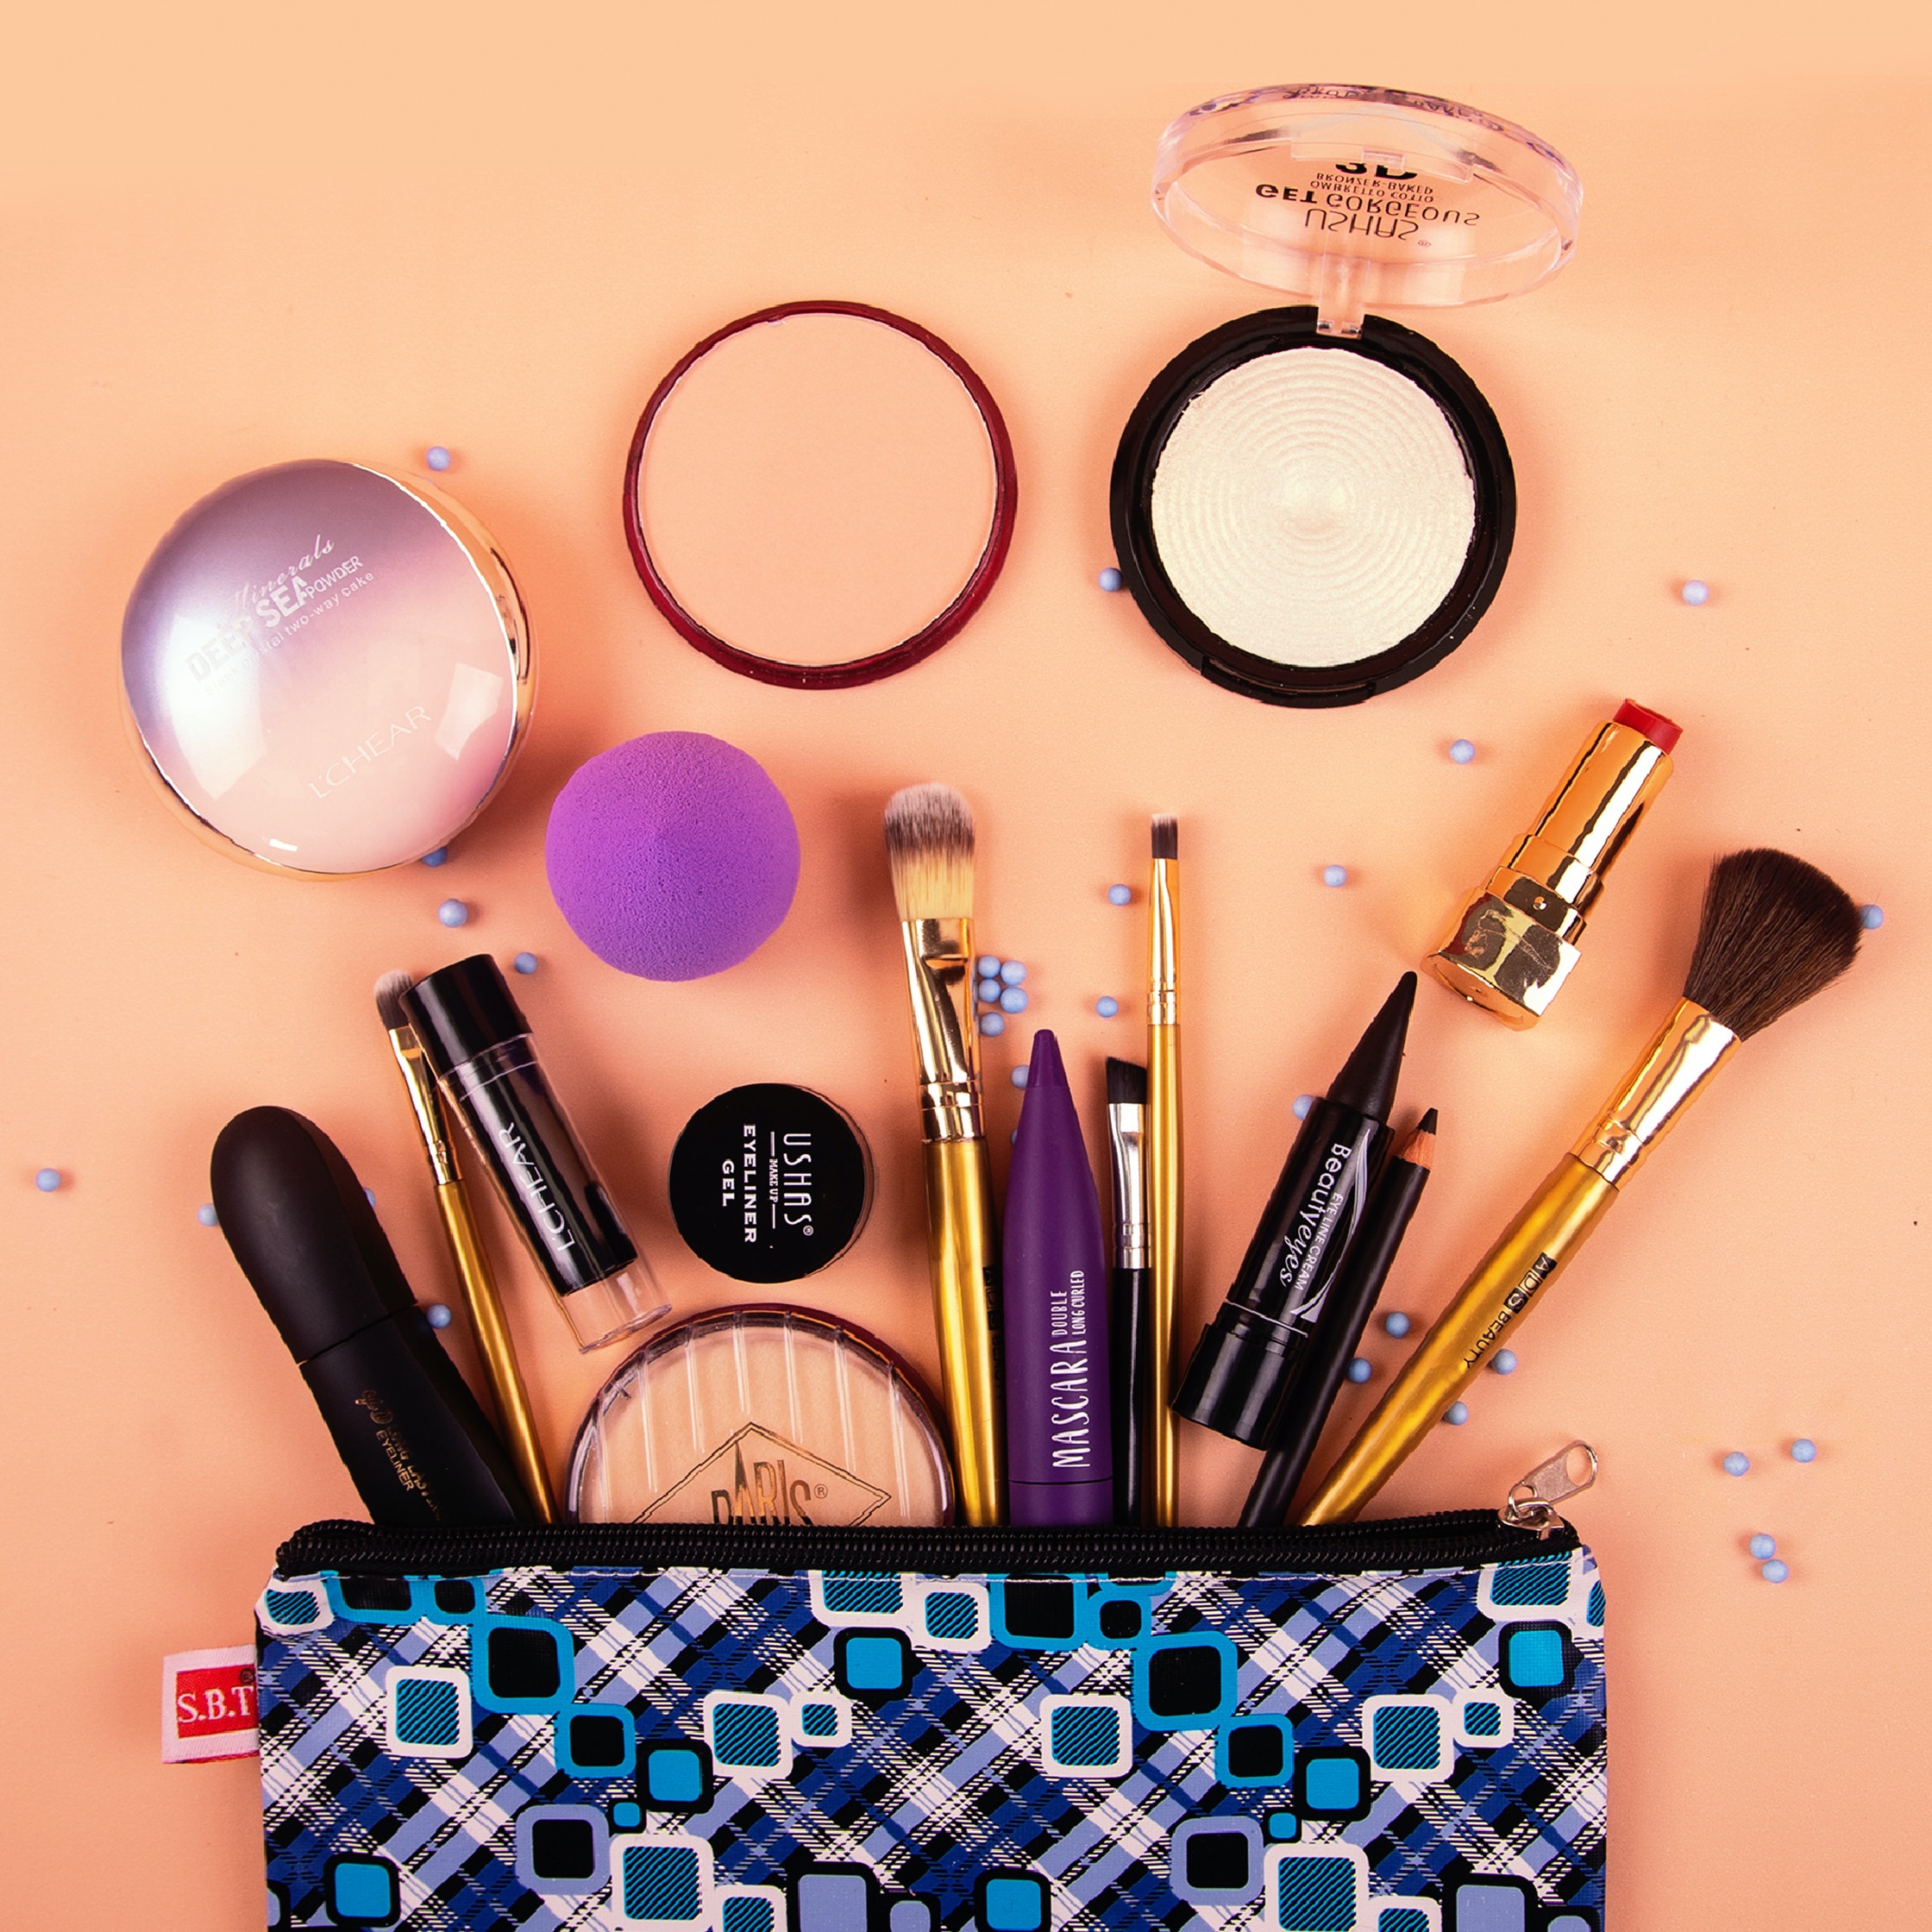 The Definitive Guide to Organizing Your Makeup Collection